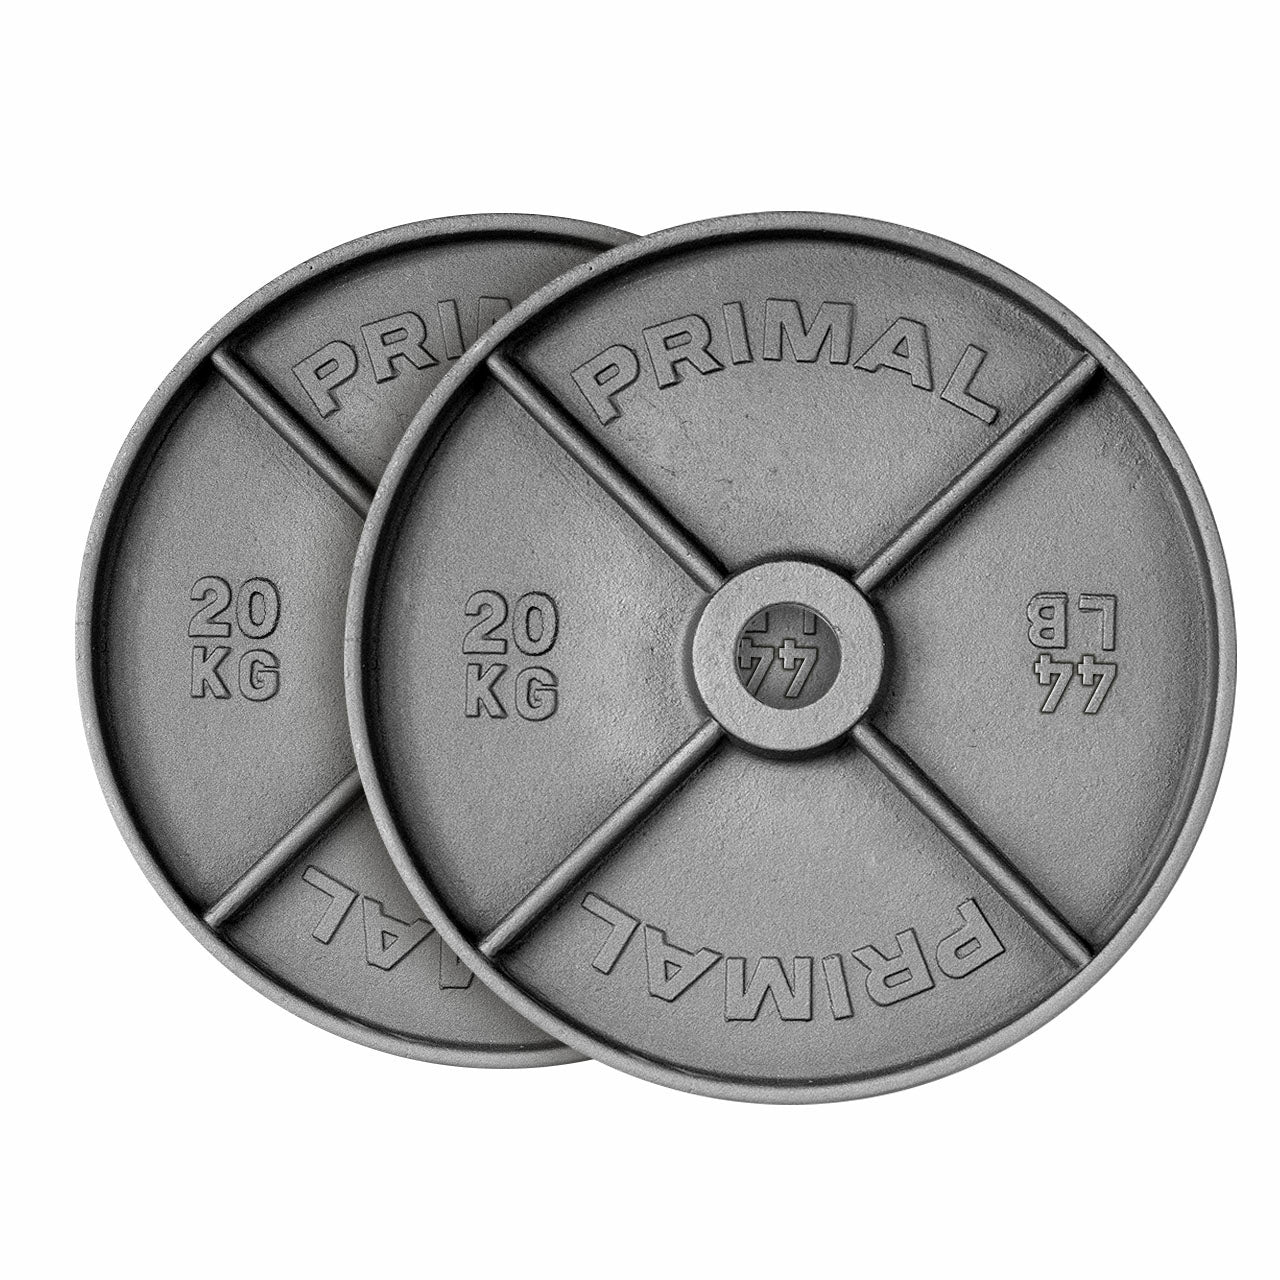 Primal Pro Series "Deep Dish" Olympic Weight Plate - 20kg (PAIR)